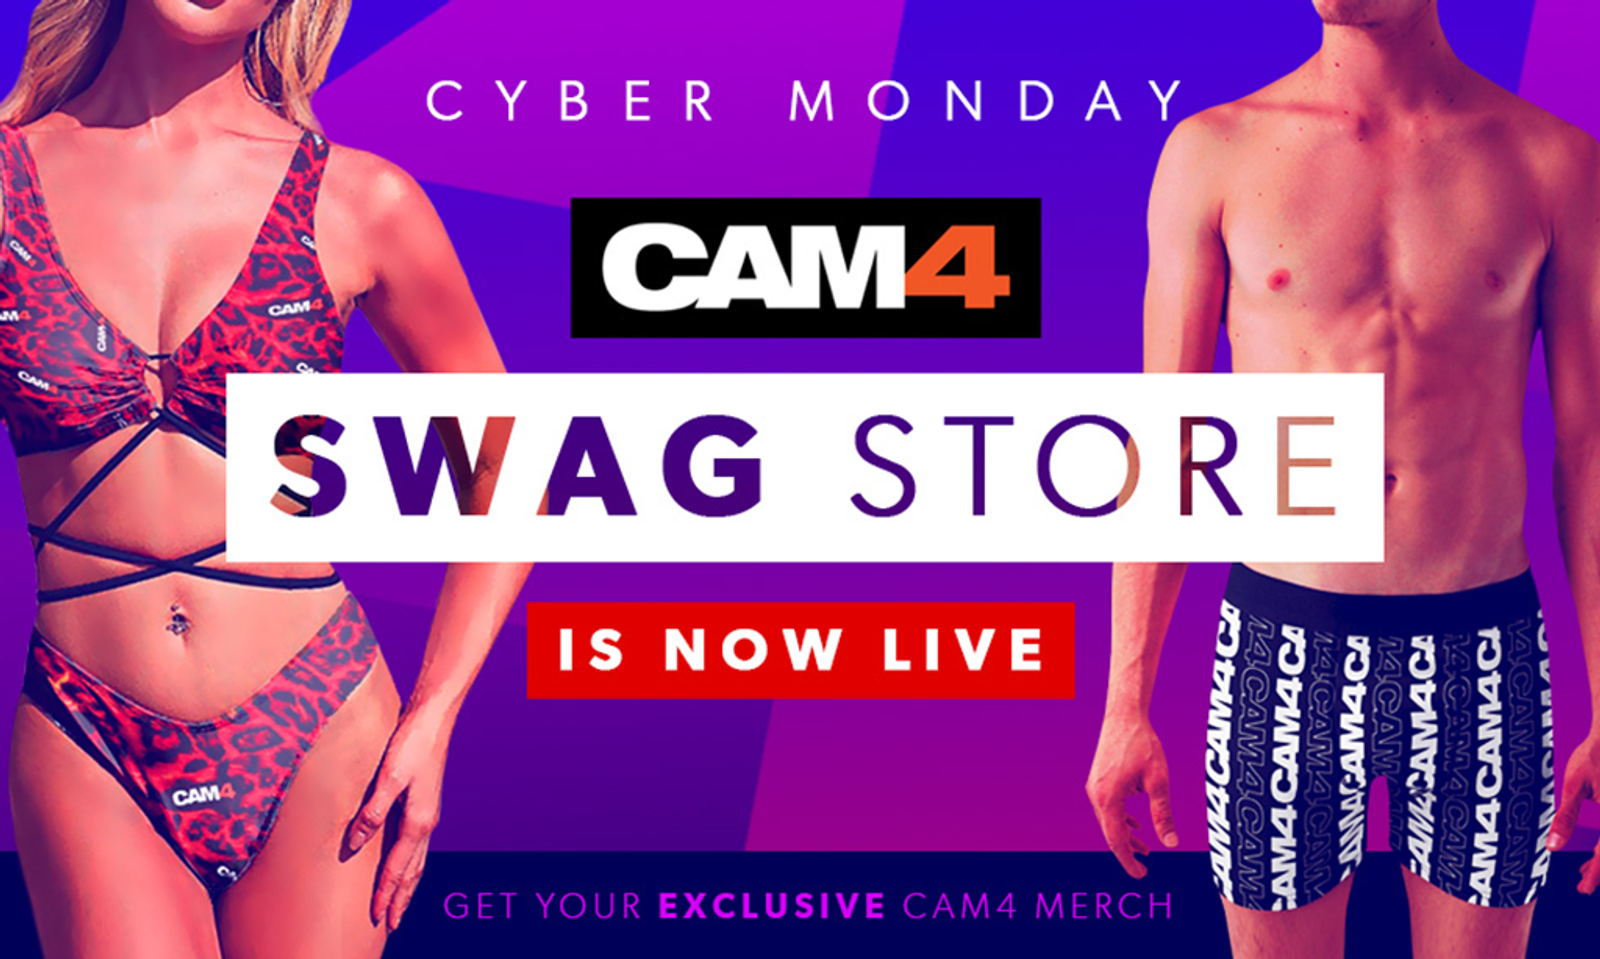 CAM4’s Swag Store, Offering New Apparel & Merch, Launches Today